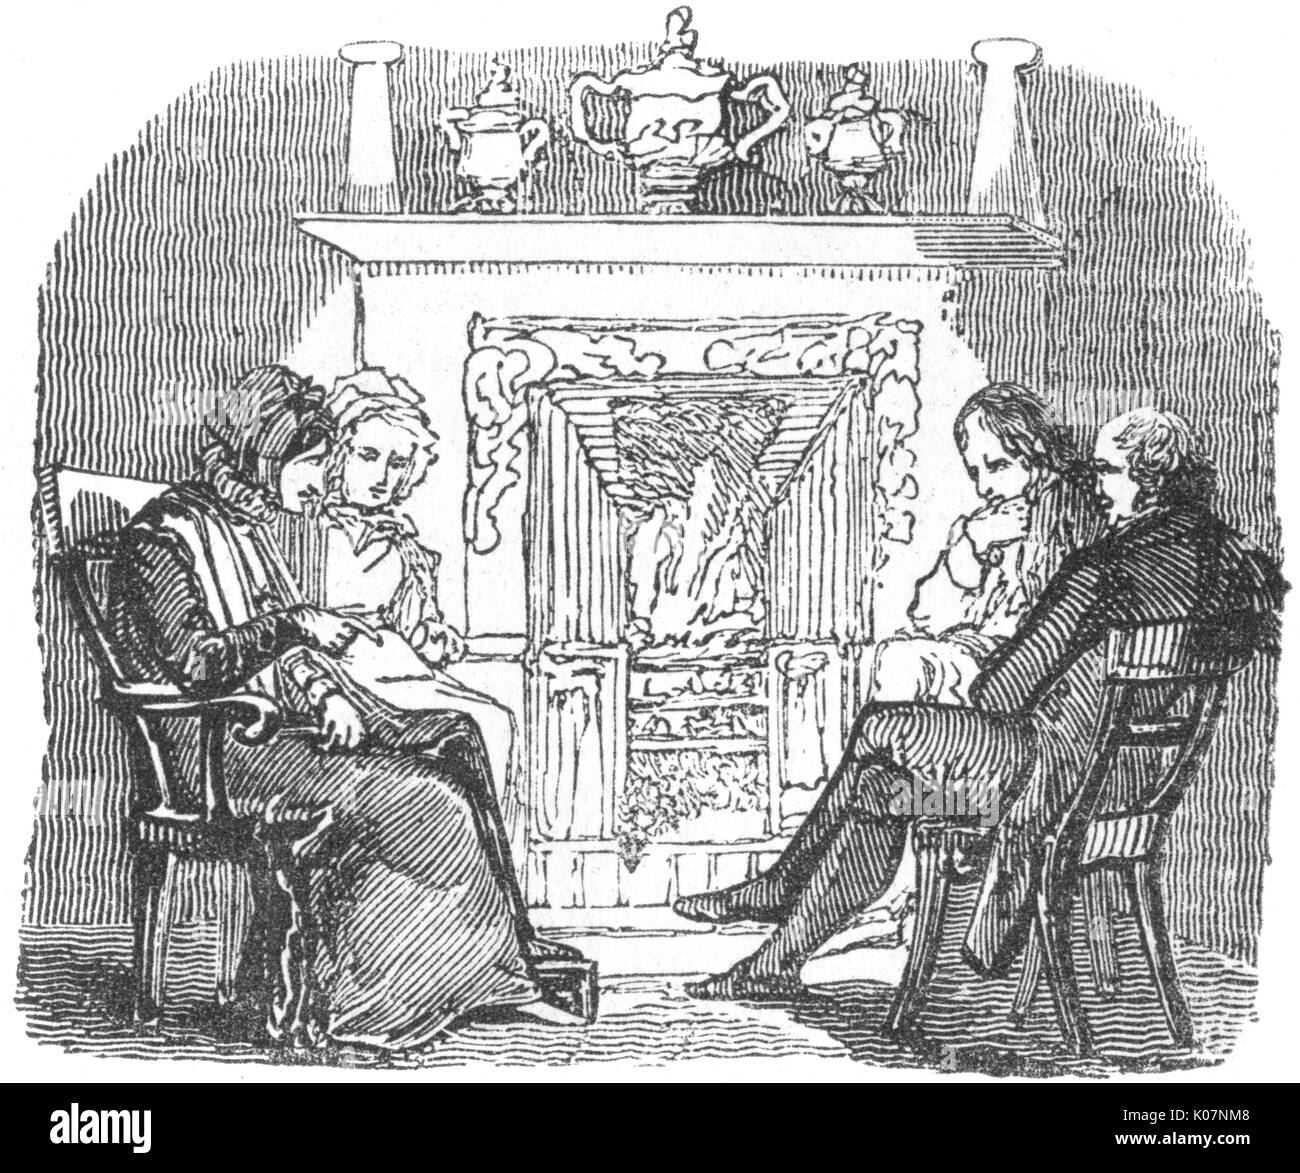 Group in front of fire, c. 1800 Stock Photo